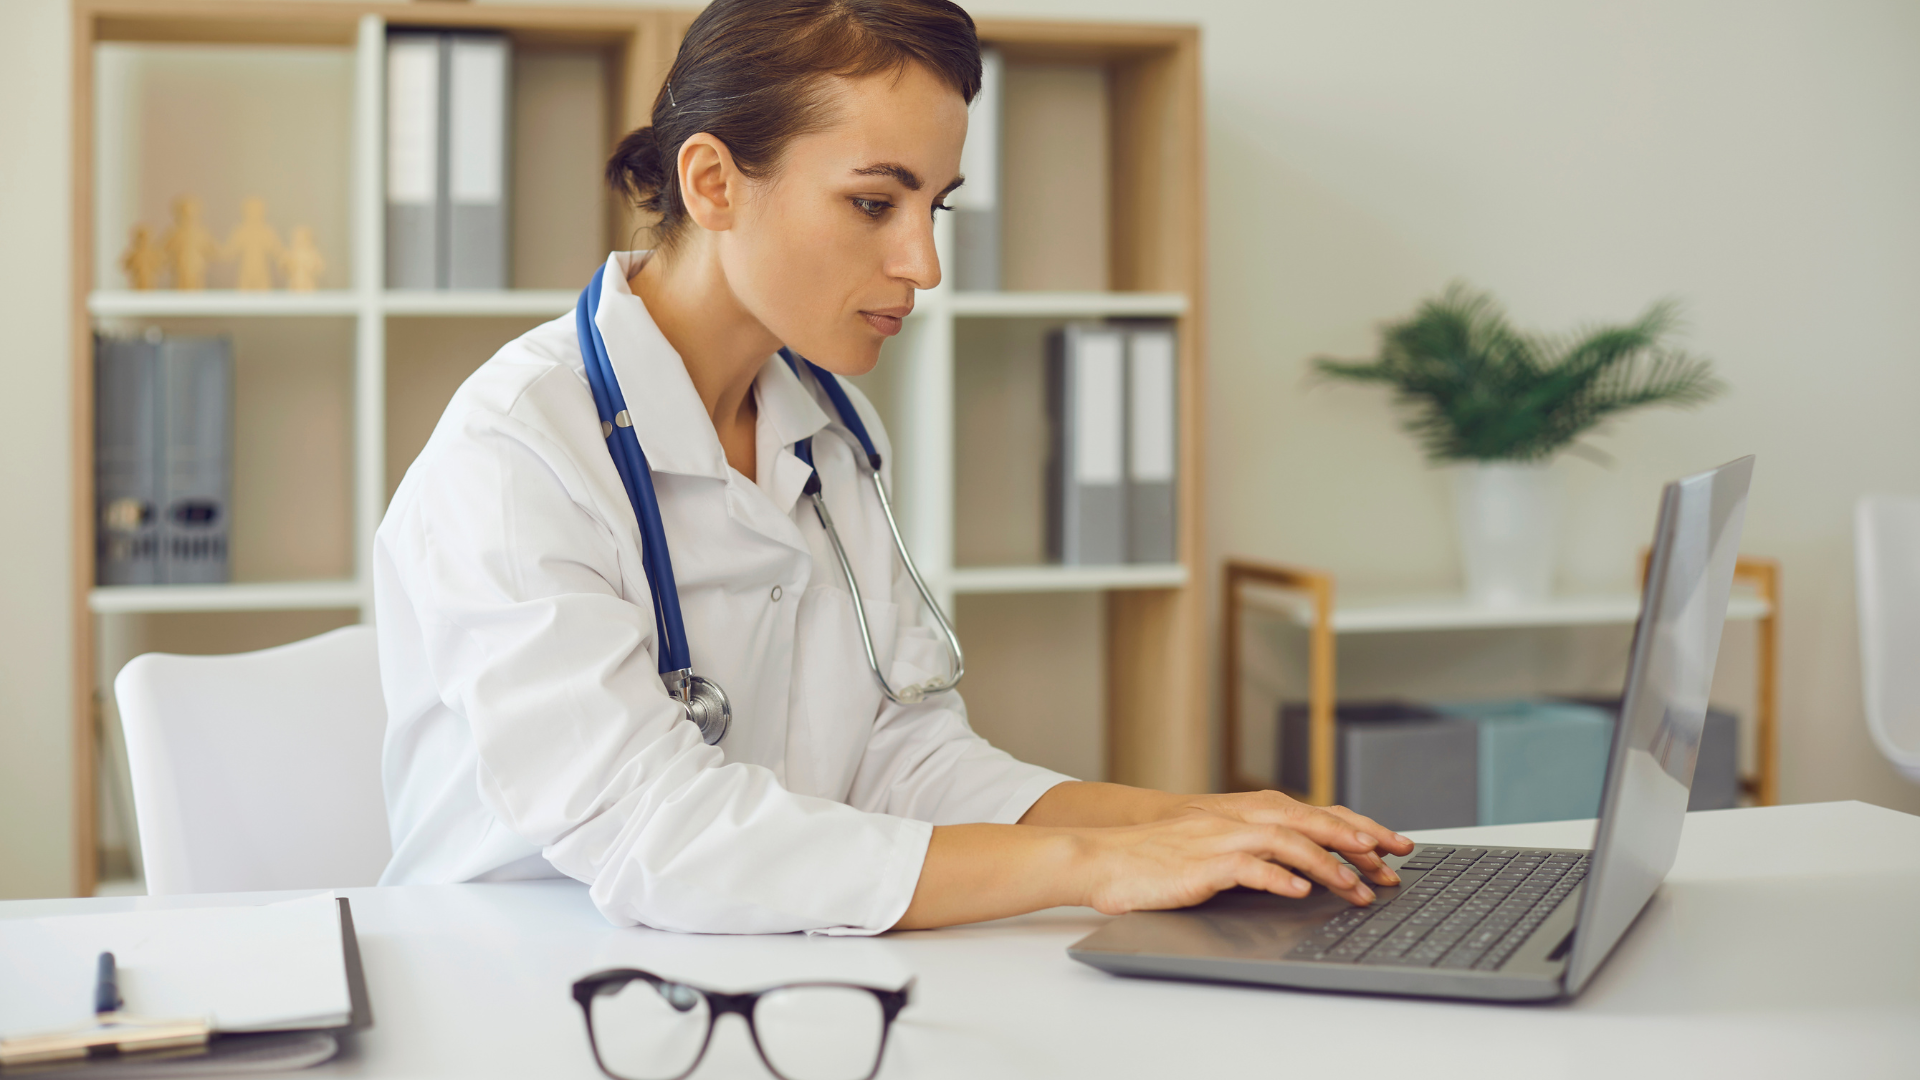 Get an EHR Solution With Everything Your Practice Needs